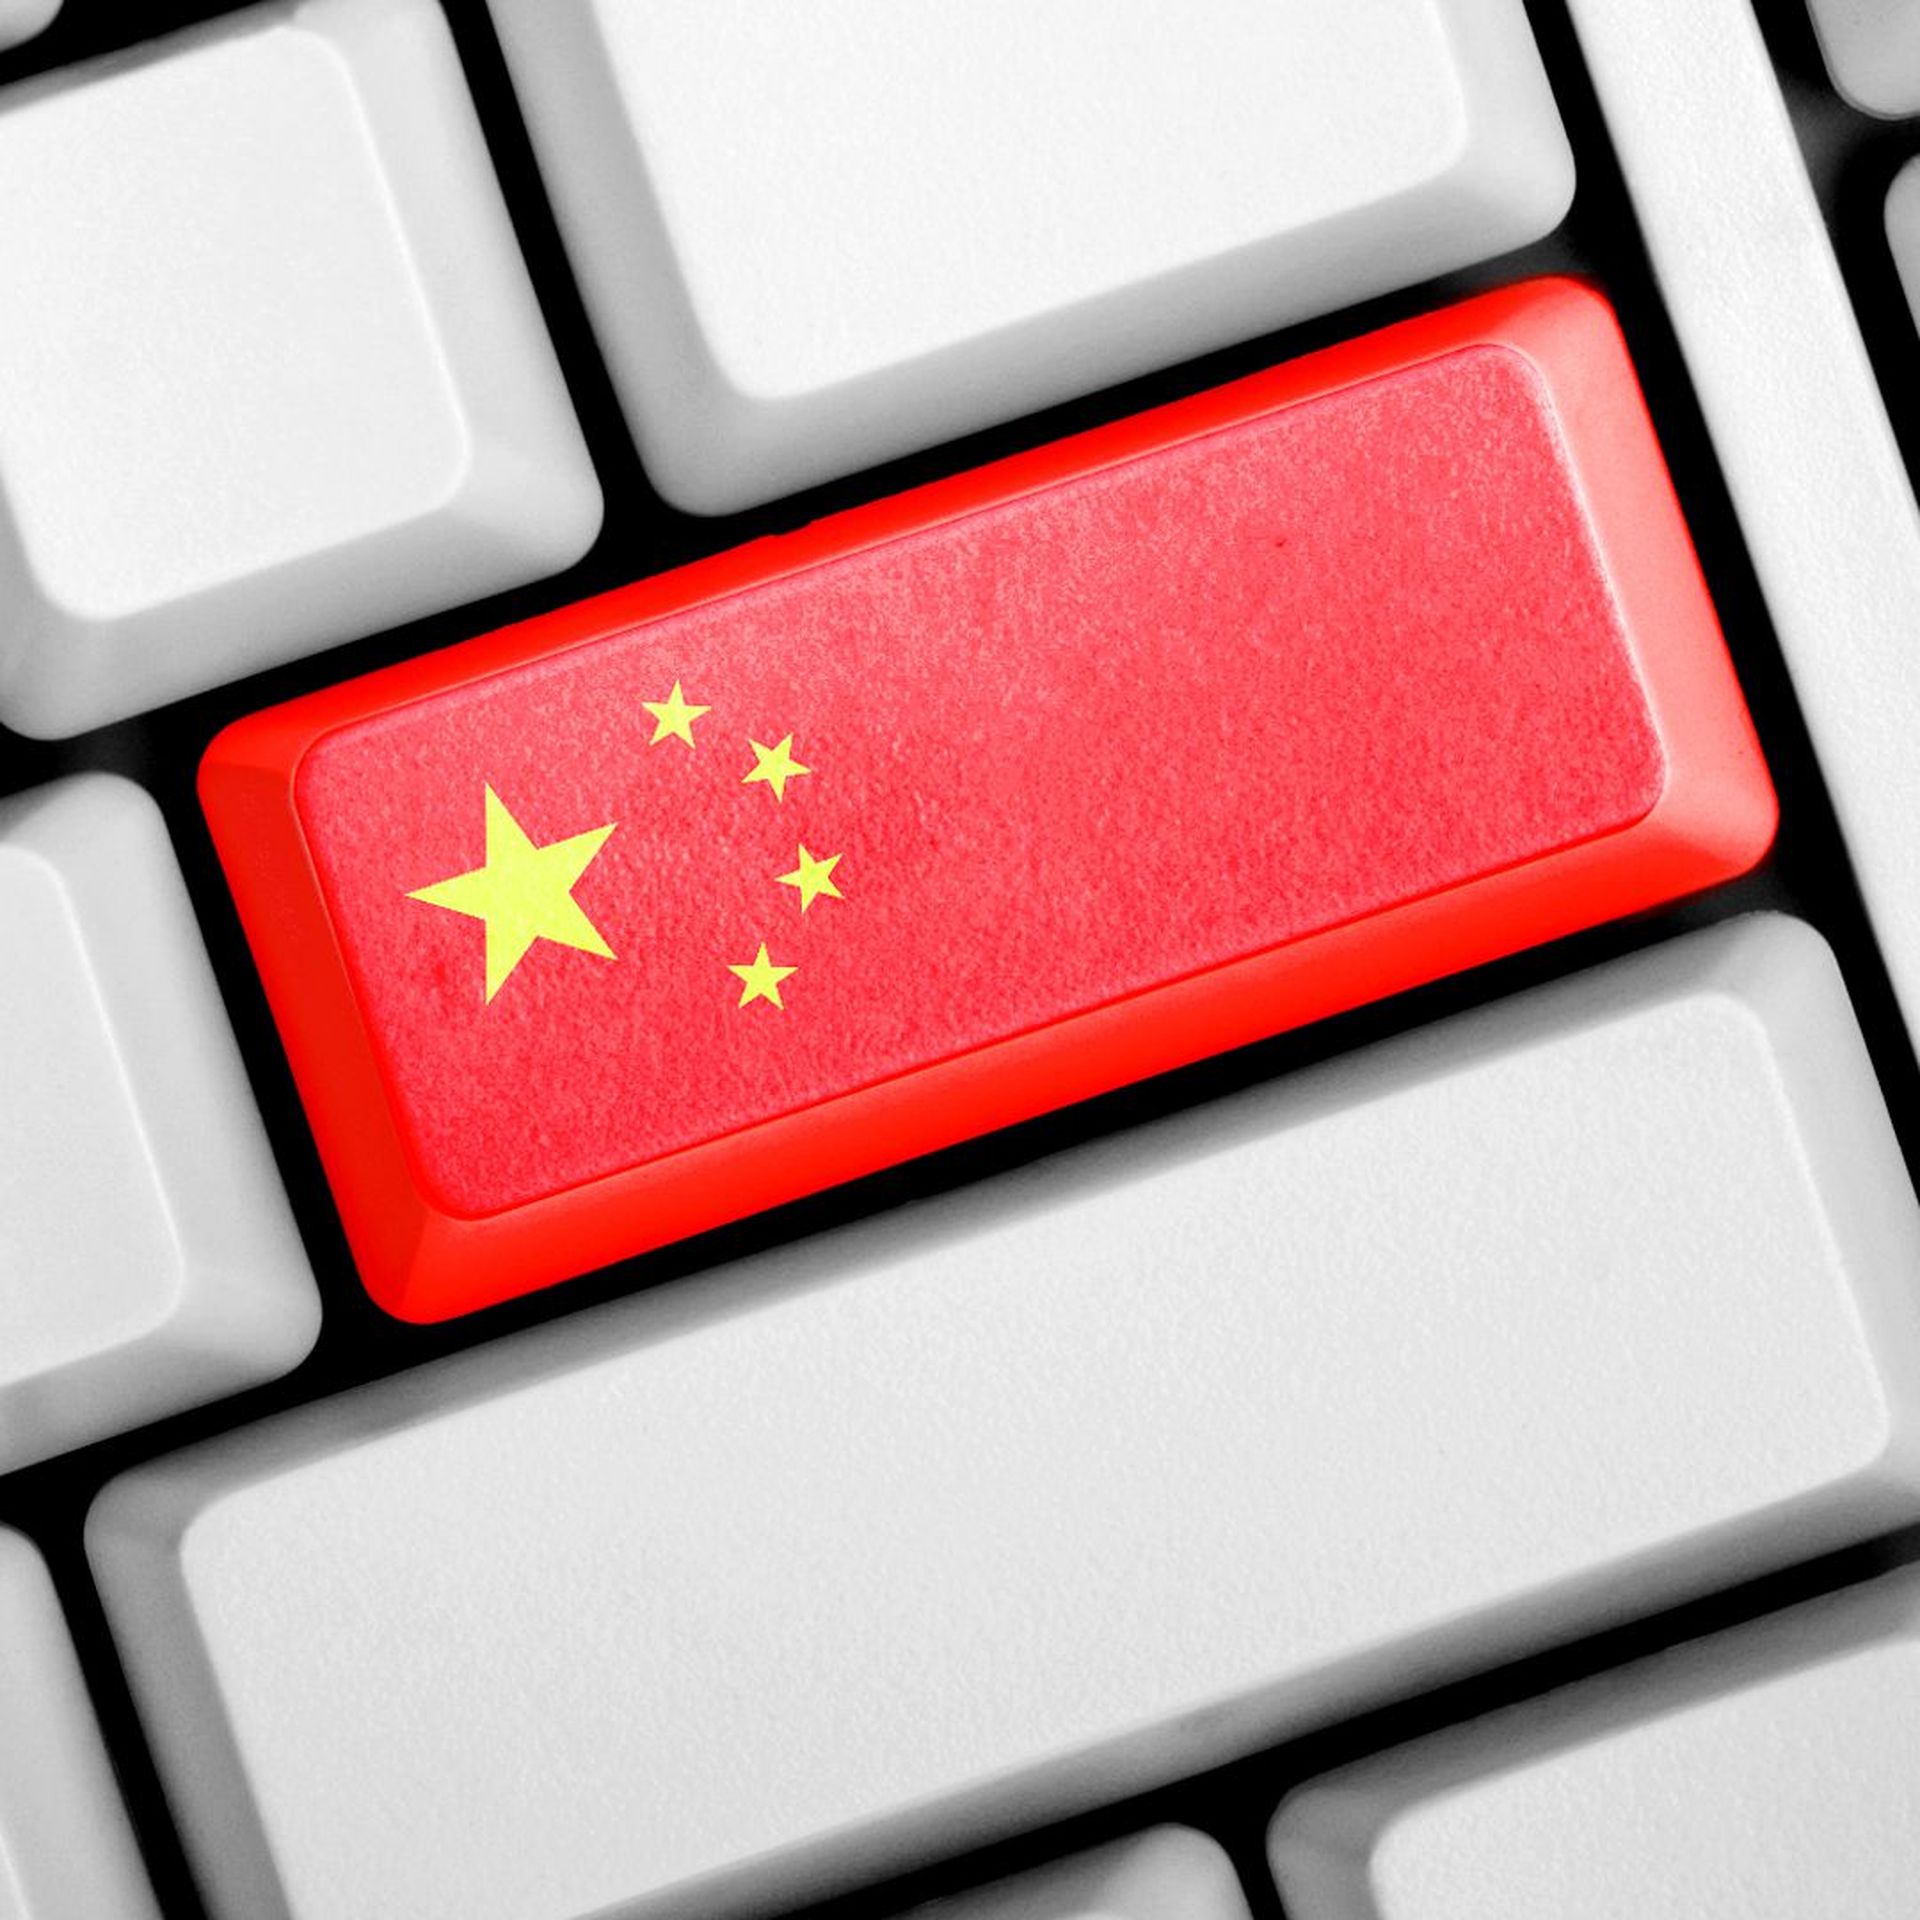 Illustration of a computer keyboard with a red return key resembling China's flag 